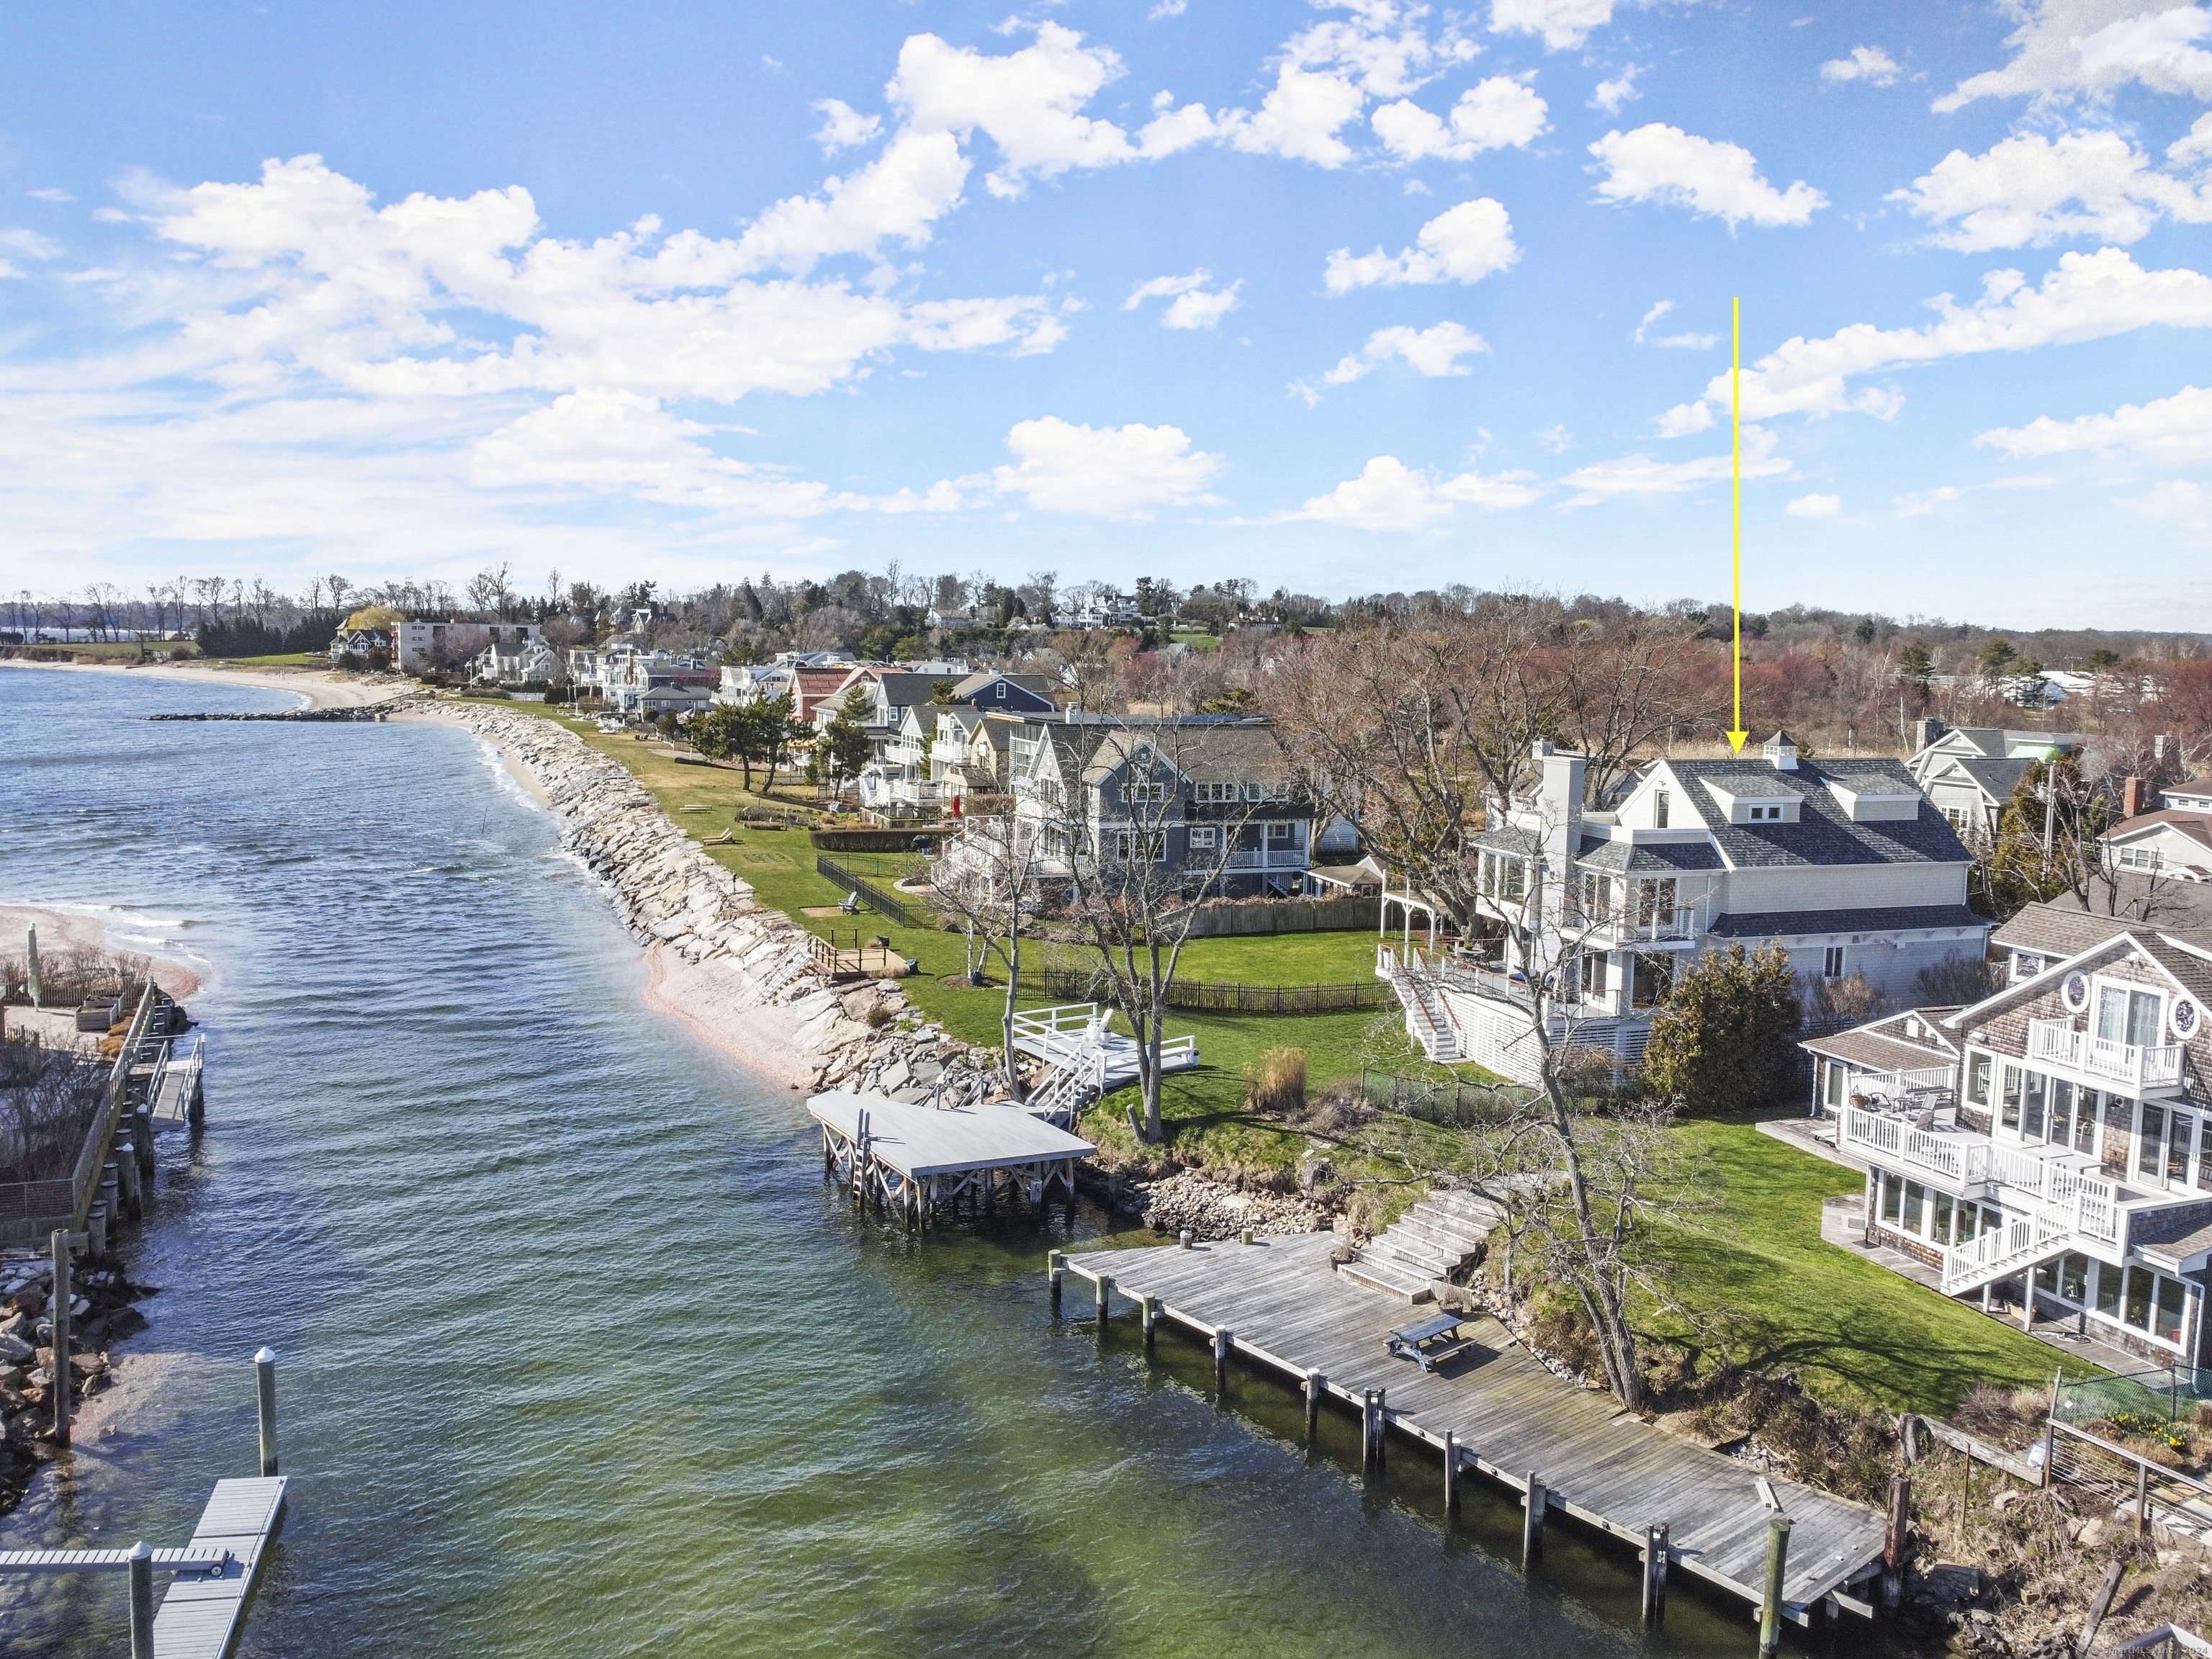 Vacation All Year Round! Direct Waterfront Home with Separate 2BR Cottage offers endless LI Sound views, large dock and spectacular sunsets. #320 (Main House) was beautifully built in 2018 and is 100% FEMA compliant. This perfect beach home is a light filled 4BR/4Bath, direct waterfront dream with deep water dock and direct access to both the Sound and Creek. The gourmet kitchen and great room seamlessly bring the outside in and flow onto the spacious wrap around deck, ideal for entertaining and dining. The luxurious primary suite with gas fireplace and floor to ceiling panoramic views offers endless tranquility while the finished 3rd floor space with outdoor deck and hookup for hot tub provides lots of hangout options. 3 additional private bedrooms with 3 full baths, including a 1st floor bedroom option which also works beautifully as an office. A 3 car garage underneath with plenty of storage for kayaks and paddle boards offers endless possibilities. #318 (Cottage) is an additional 832+sqft 2BR/1Bath guest cottage and provides tons of options as either an additional living space or as an income producing investment. Cottage is currently rented thru June 2024. .32 acres provides for privacy and completes the premium beach location.